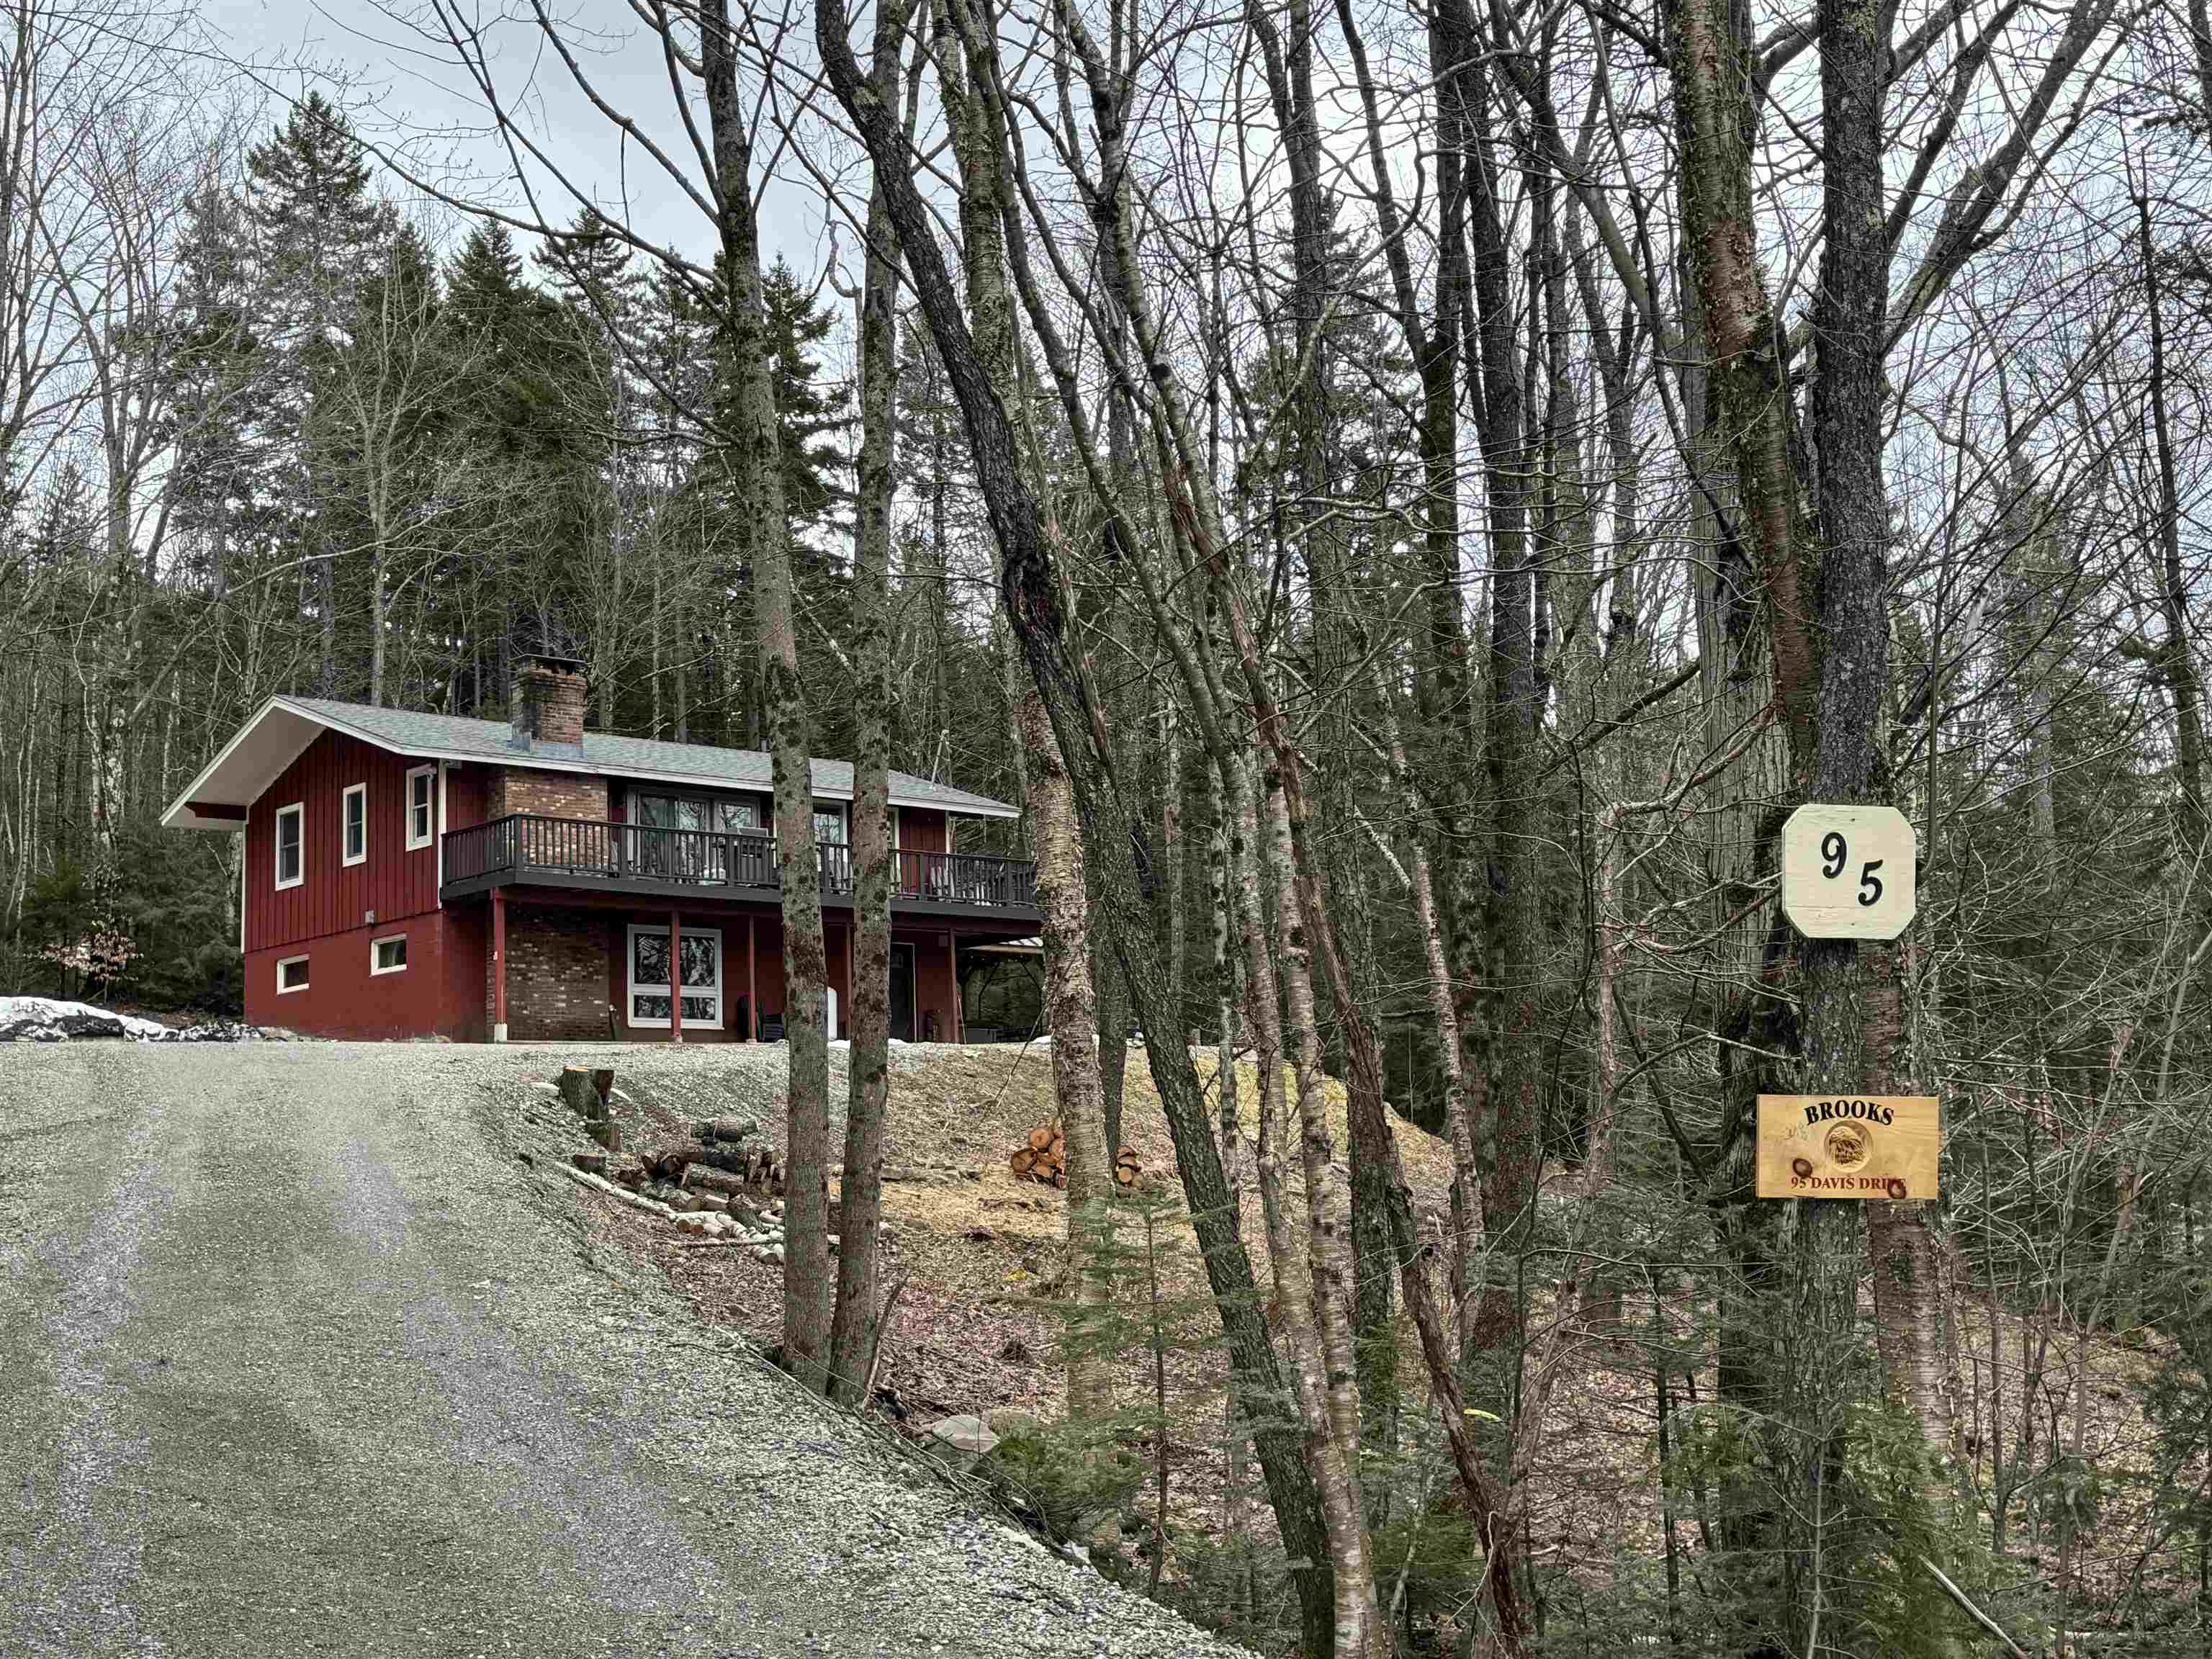 Conveniently located 4 bedroom, 2 bath chalet...